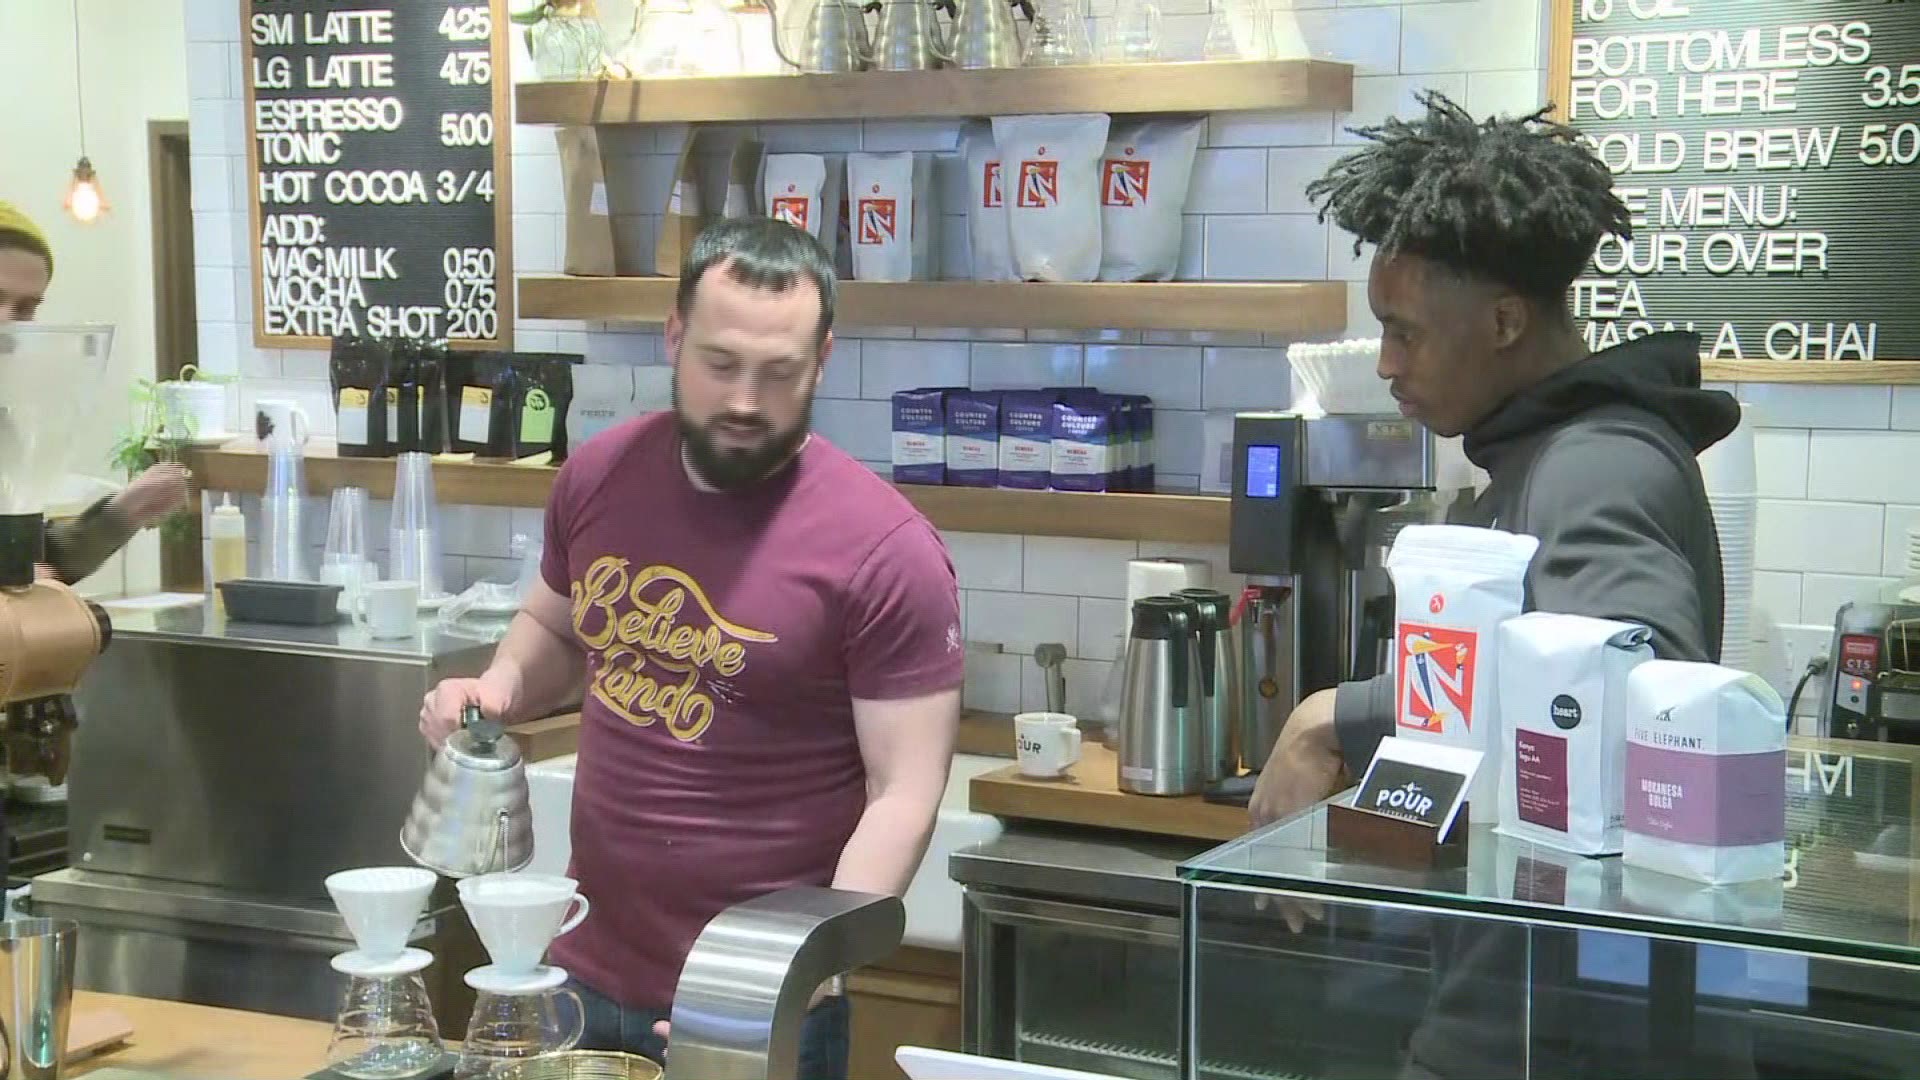 Cavs rookie Collin Sexton surprised customers at Pour Cleveland.